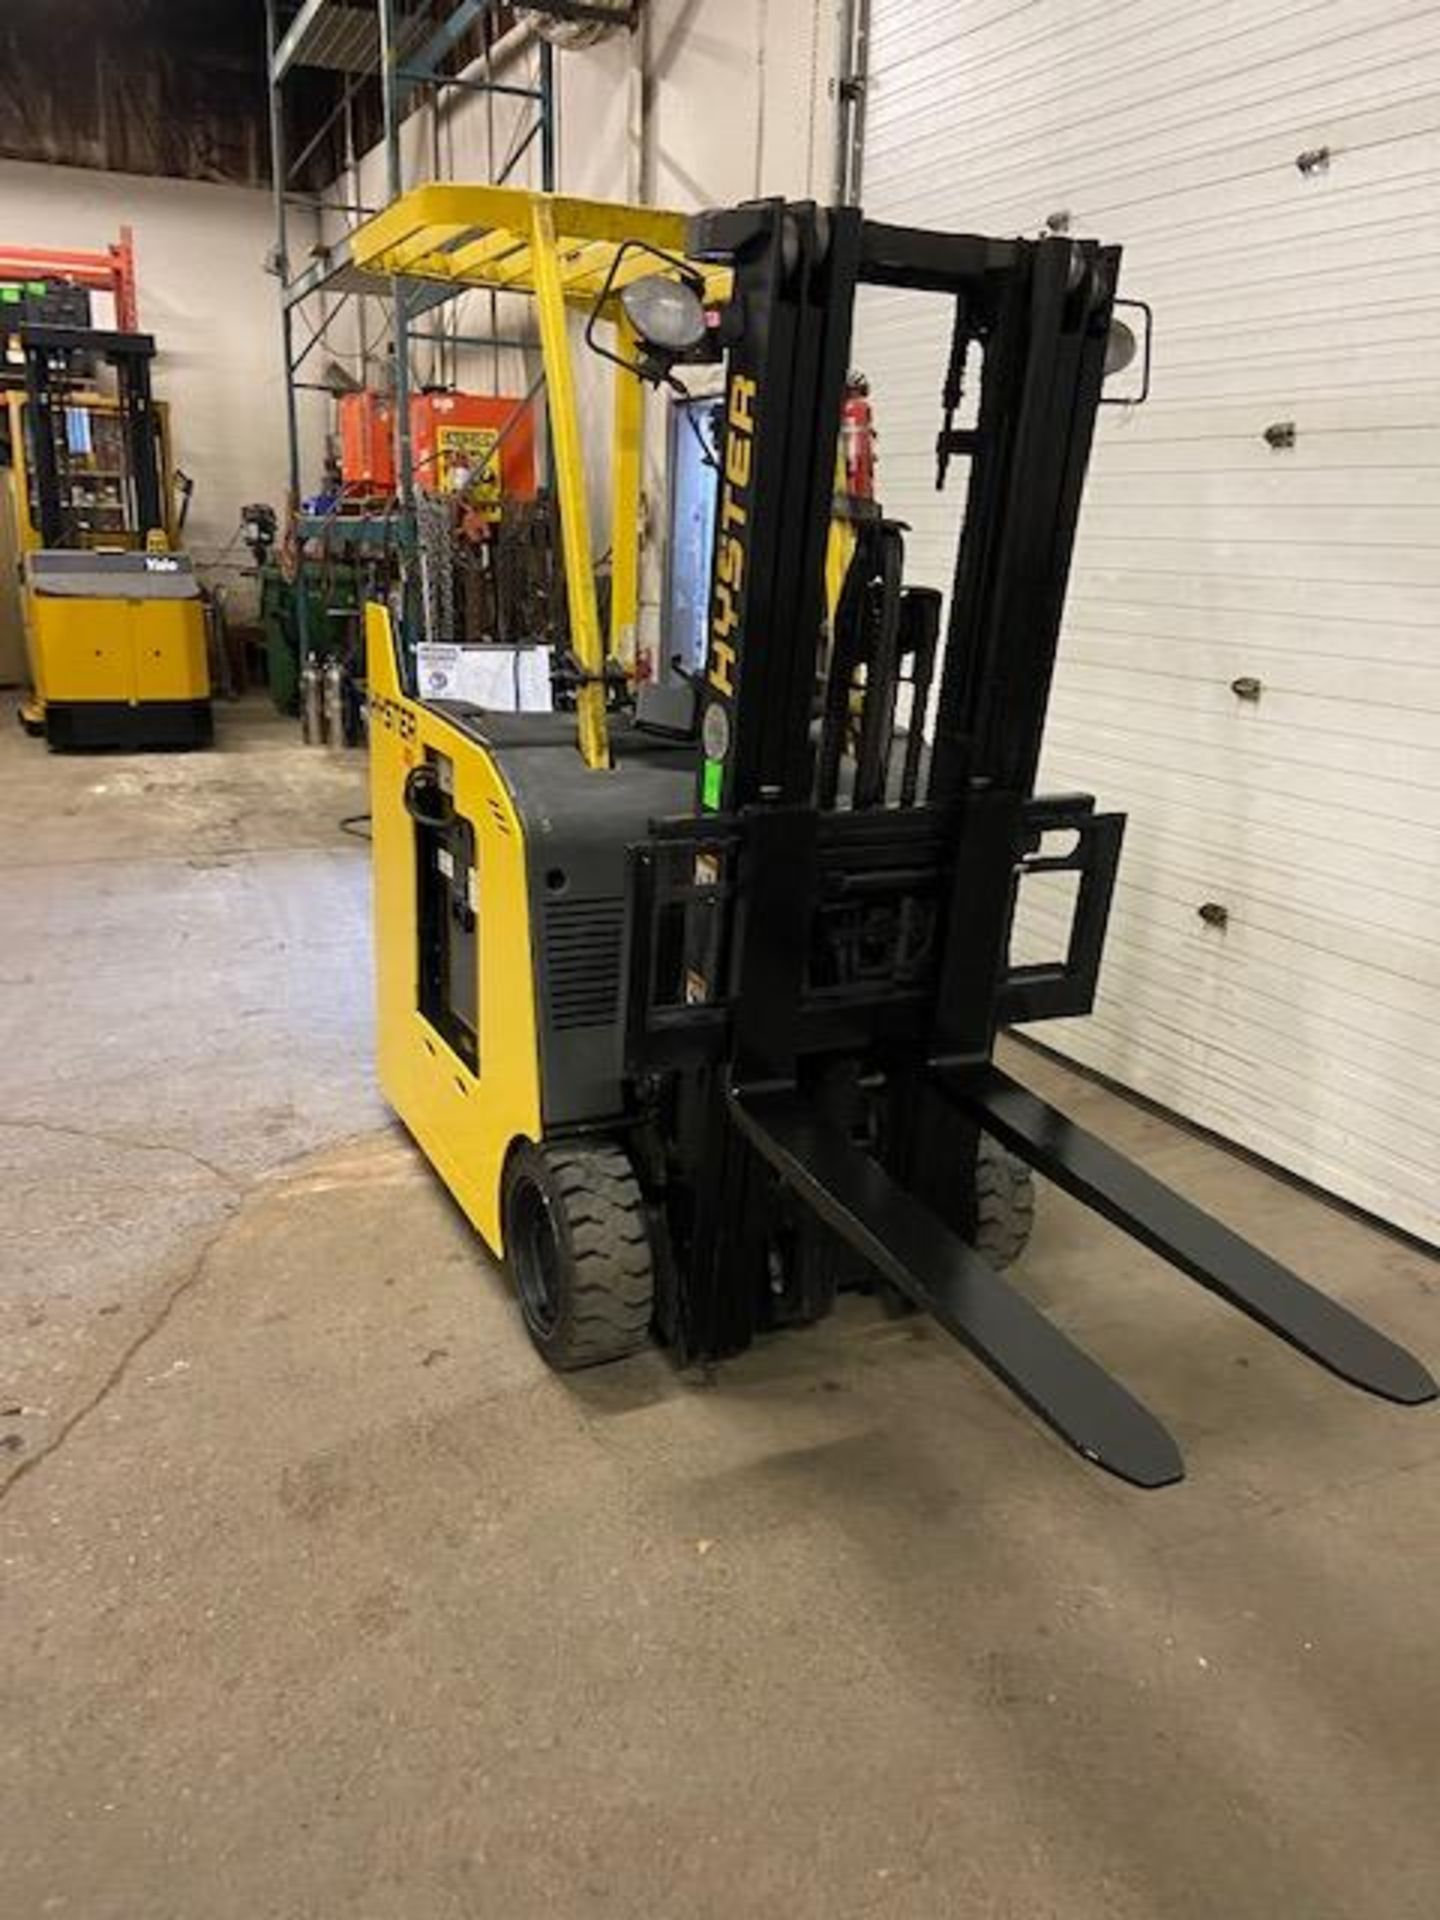 FREE CUSTOMS - Hyster 4000lbs Capacity Stand On Forklift Electric with sideshift CERTIFIED UNIT - Image 2 of 3